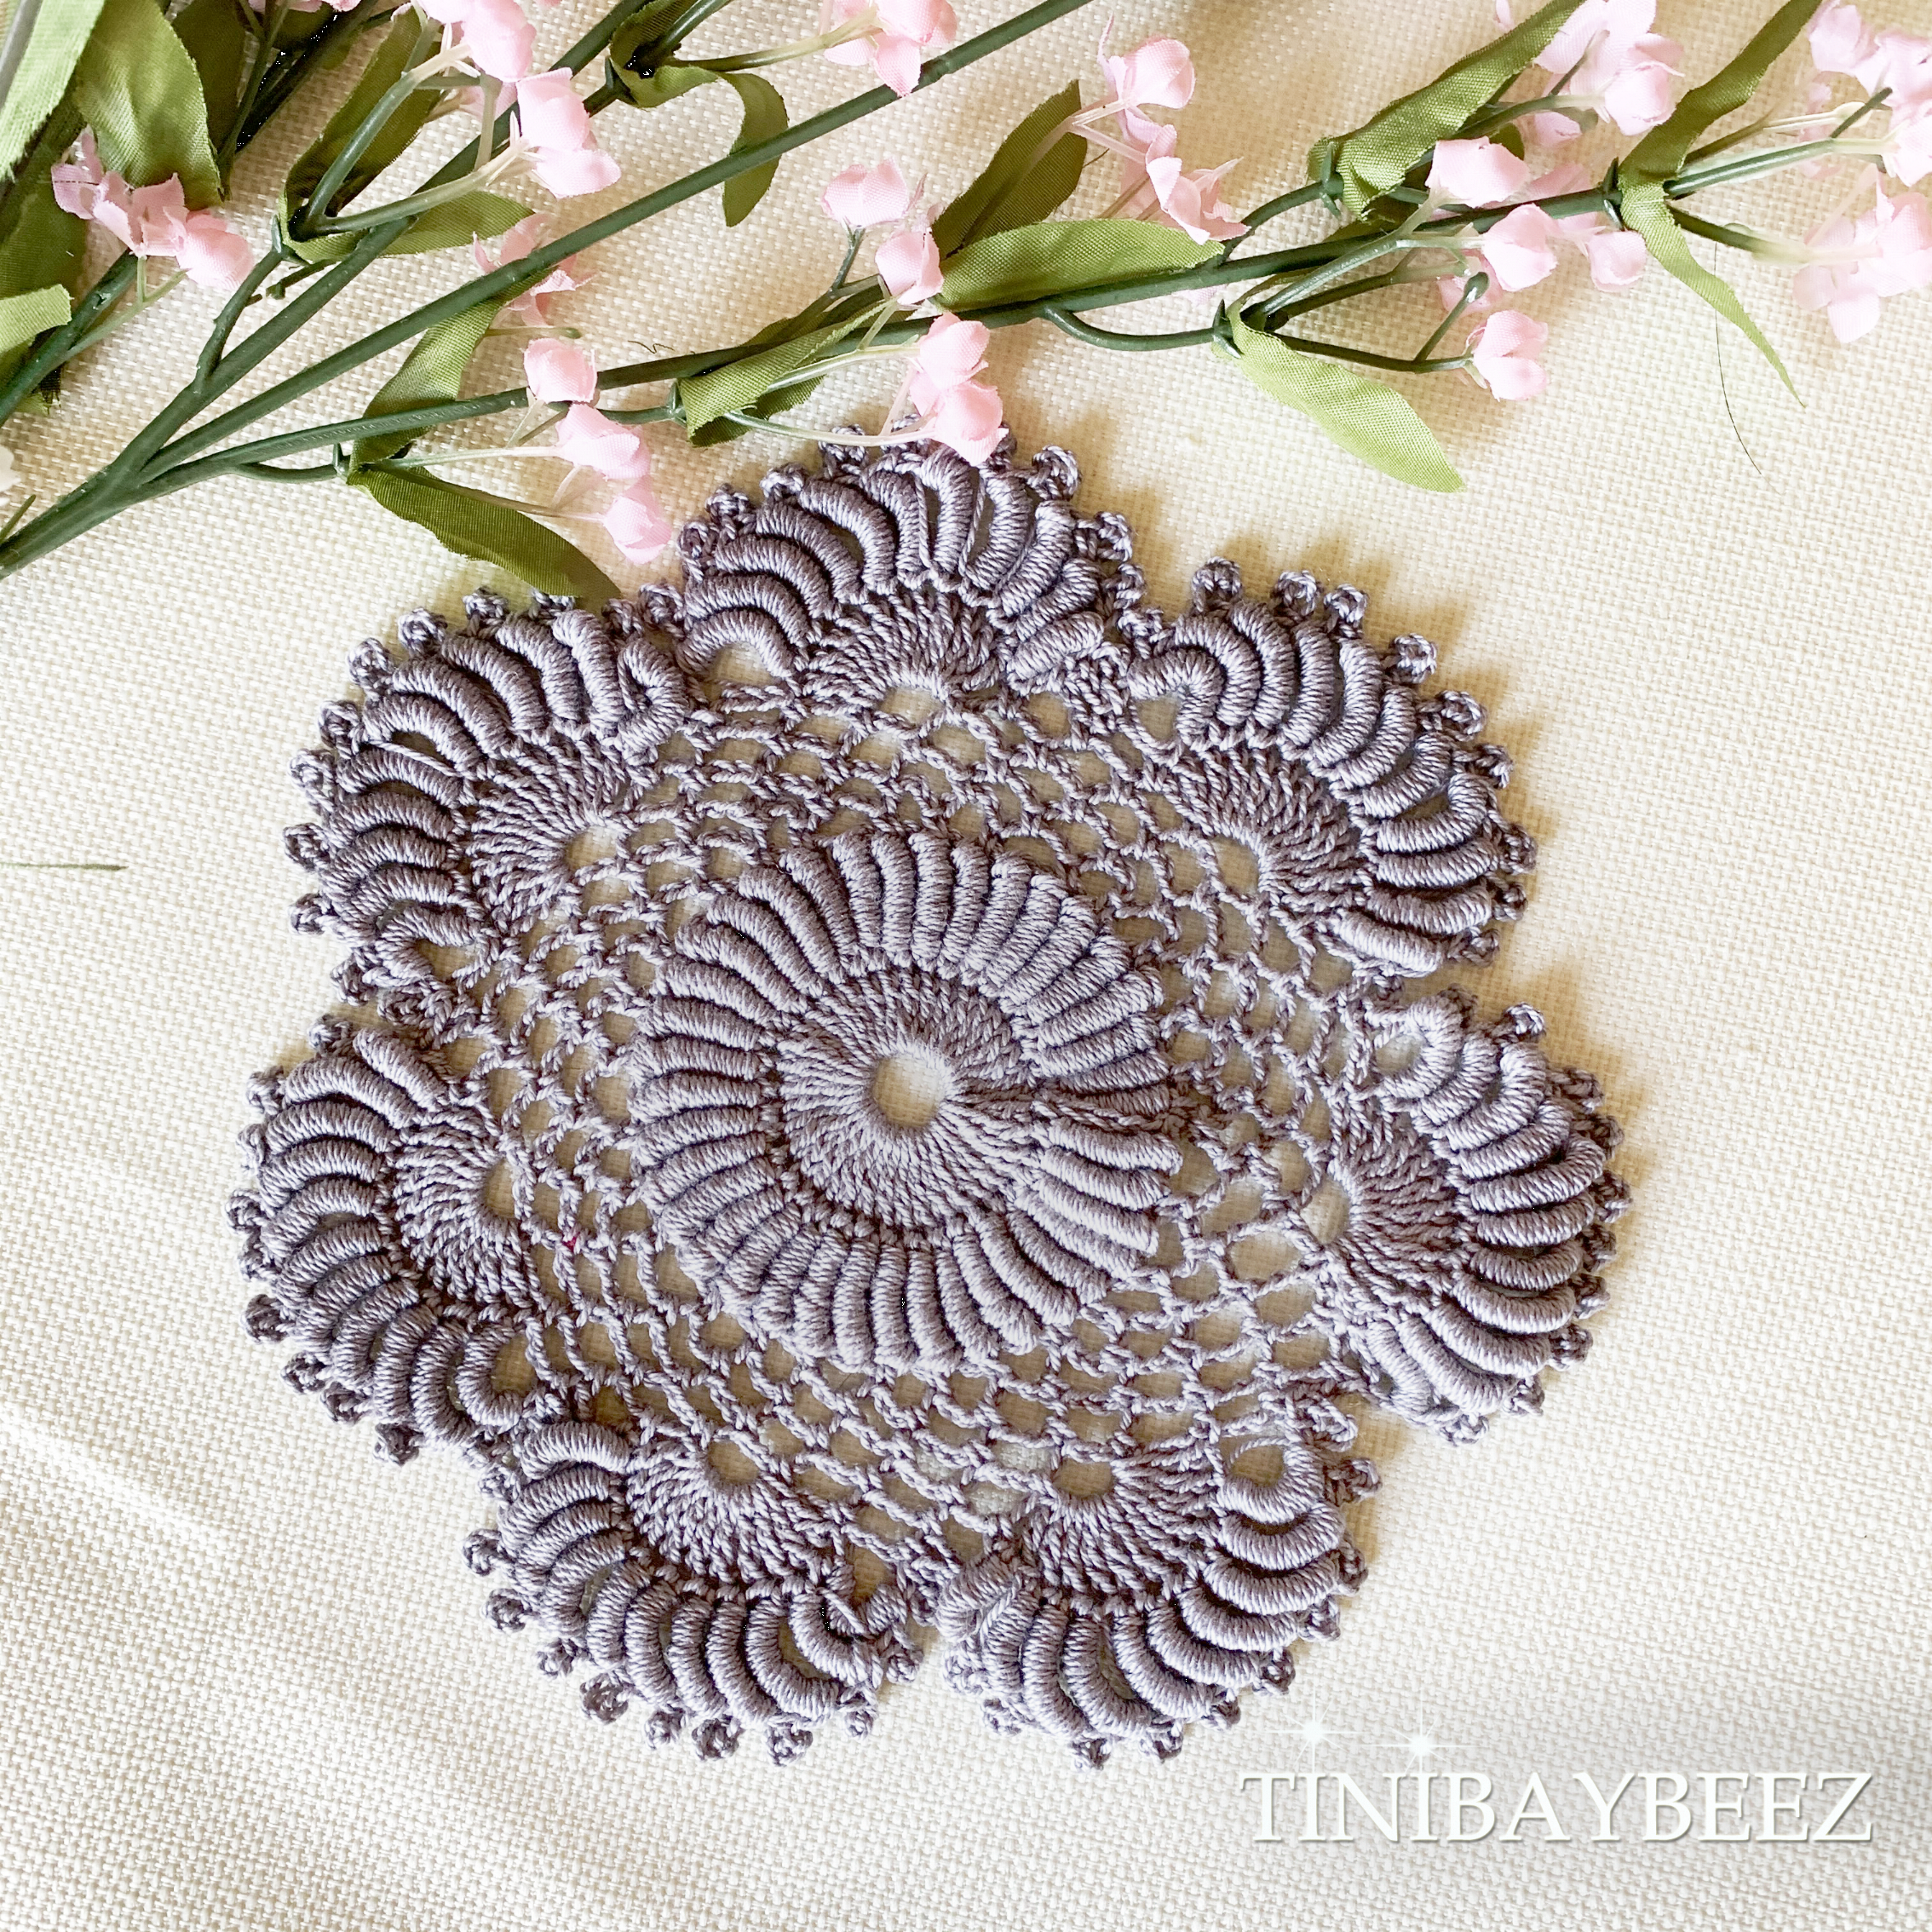 Black Round Crocheted Doilies Set of 2 -6 1/2“ Dimensional Doily-Round Doilies in a variety of different colors